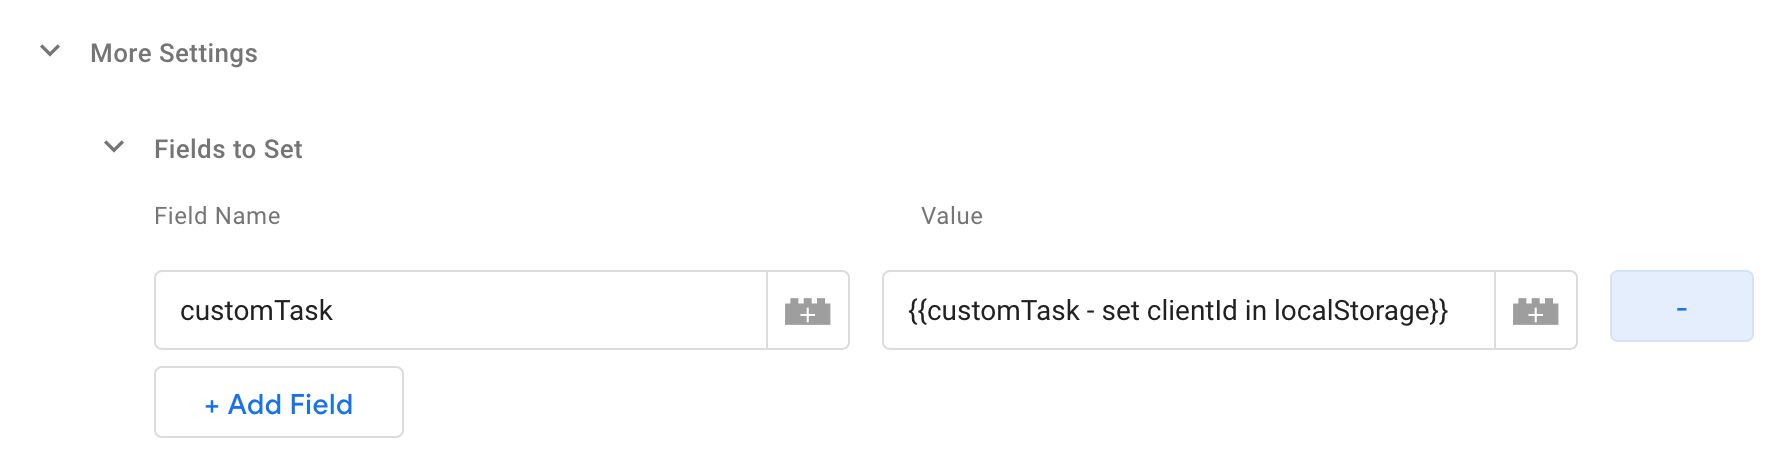 Customtask added to tag